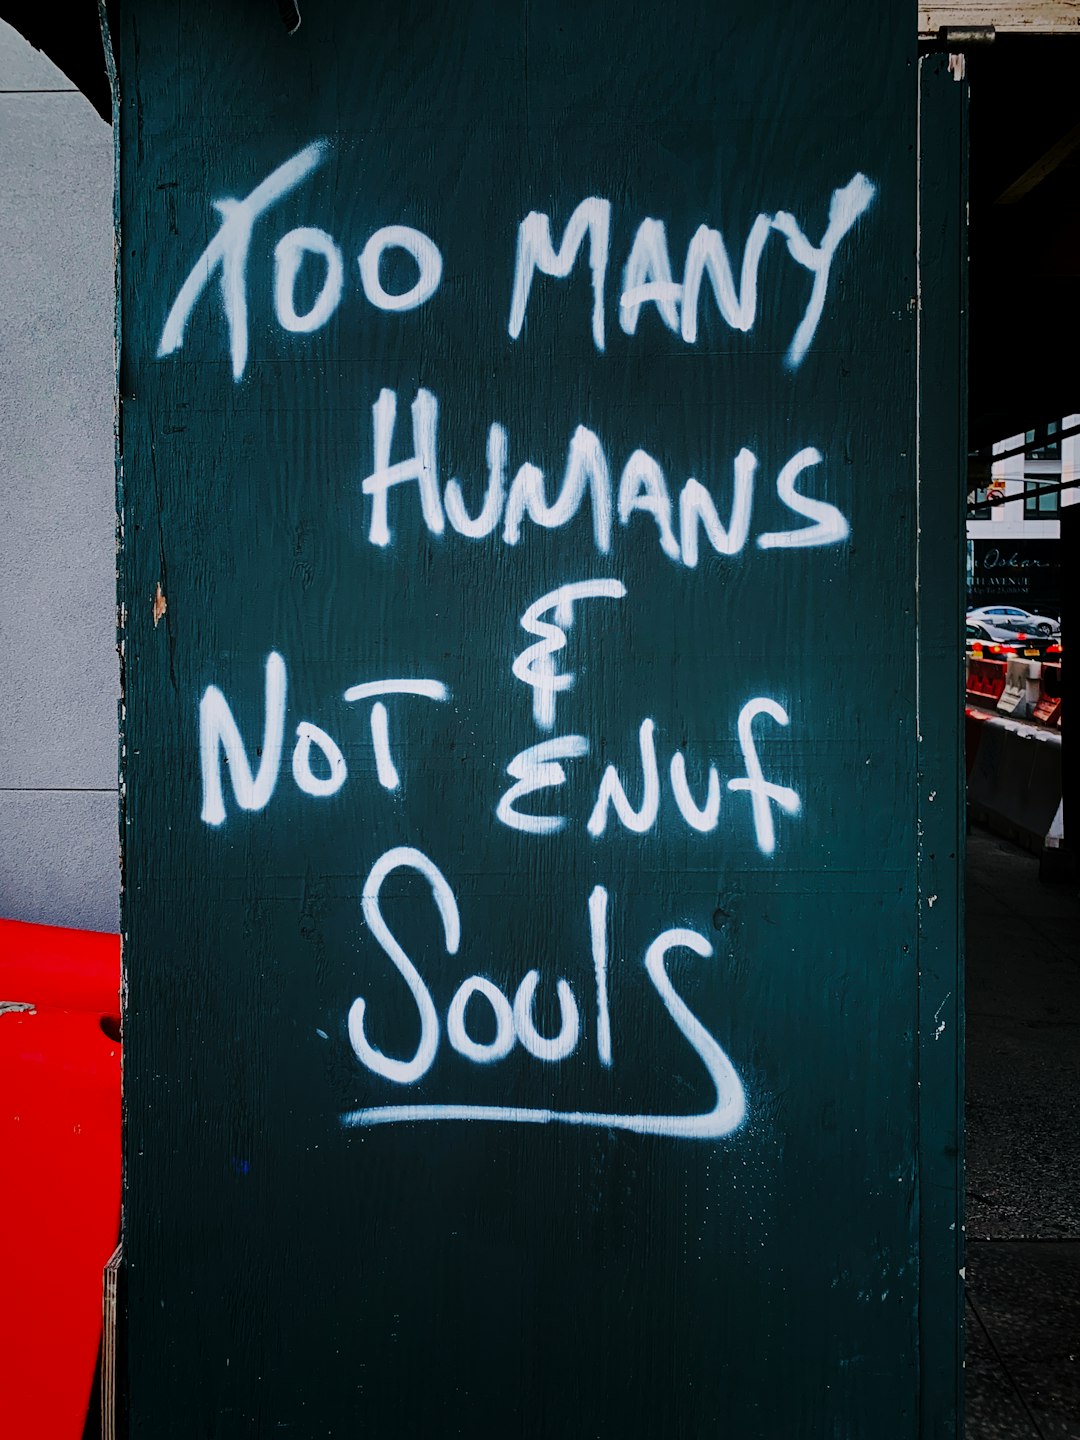 too many humans & not enuf souls sign